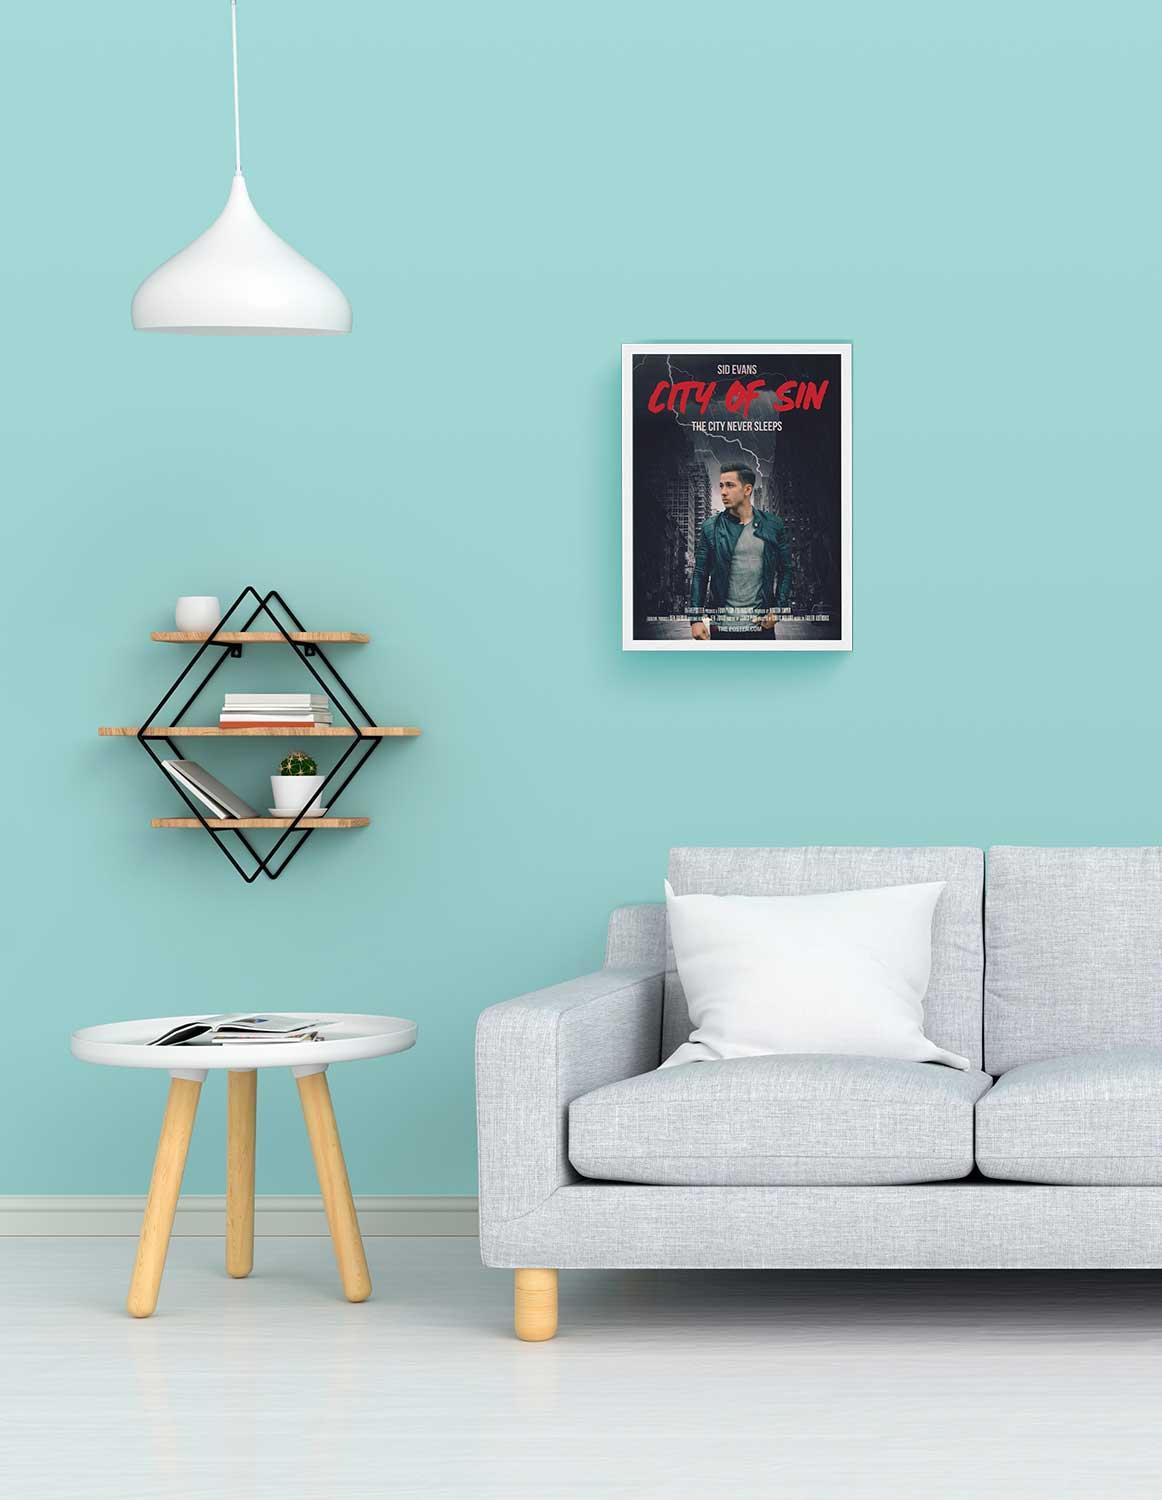 A personalized film noir movie poster in small size in a white frame above a grey sofa